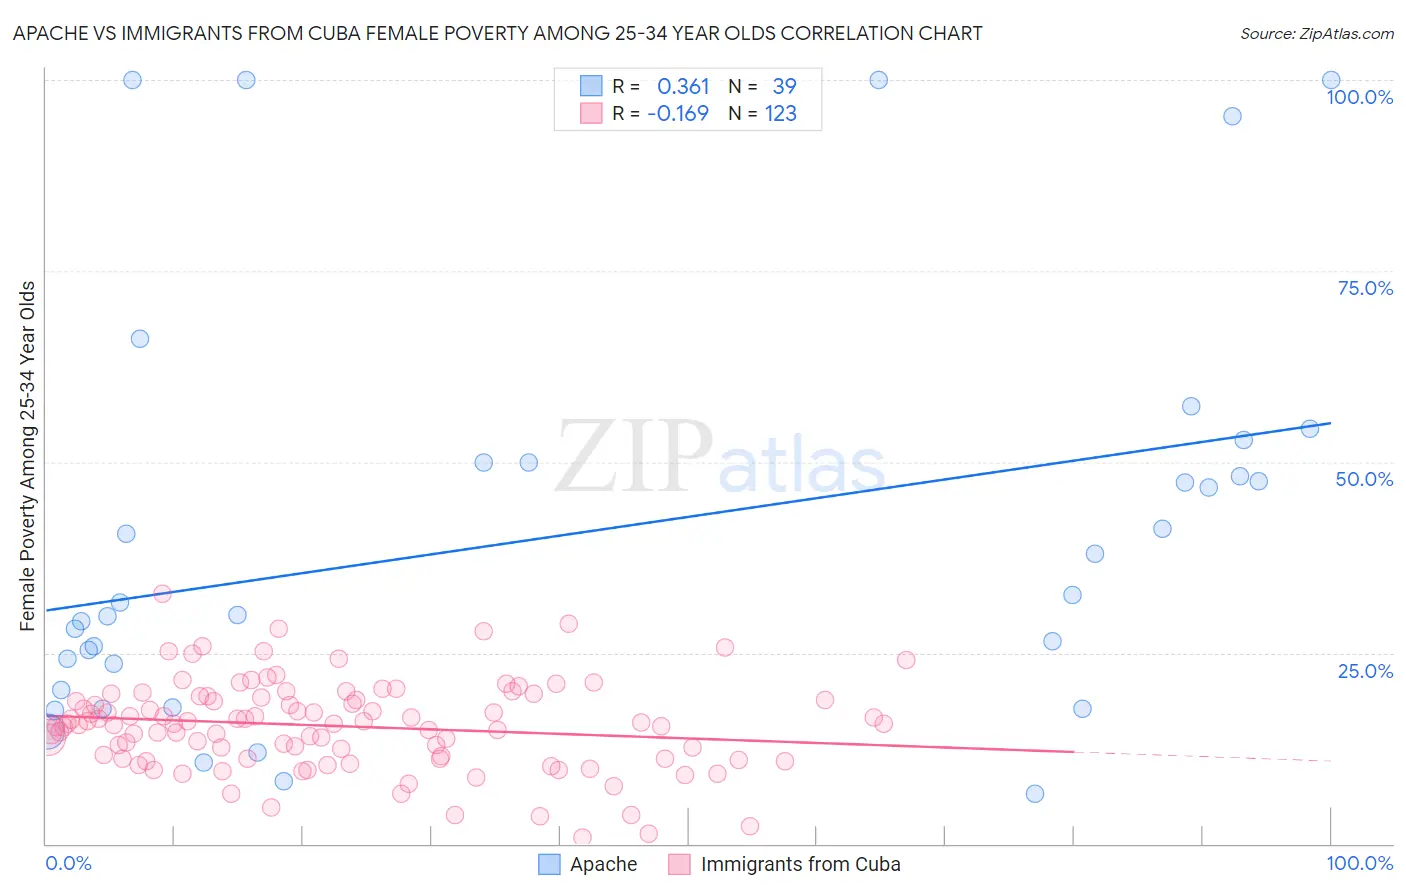 Apache vs Immigrants from Cuba Female Poverty Among 25-34 Year Olds